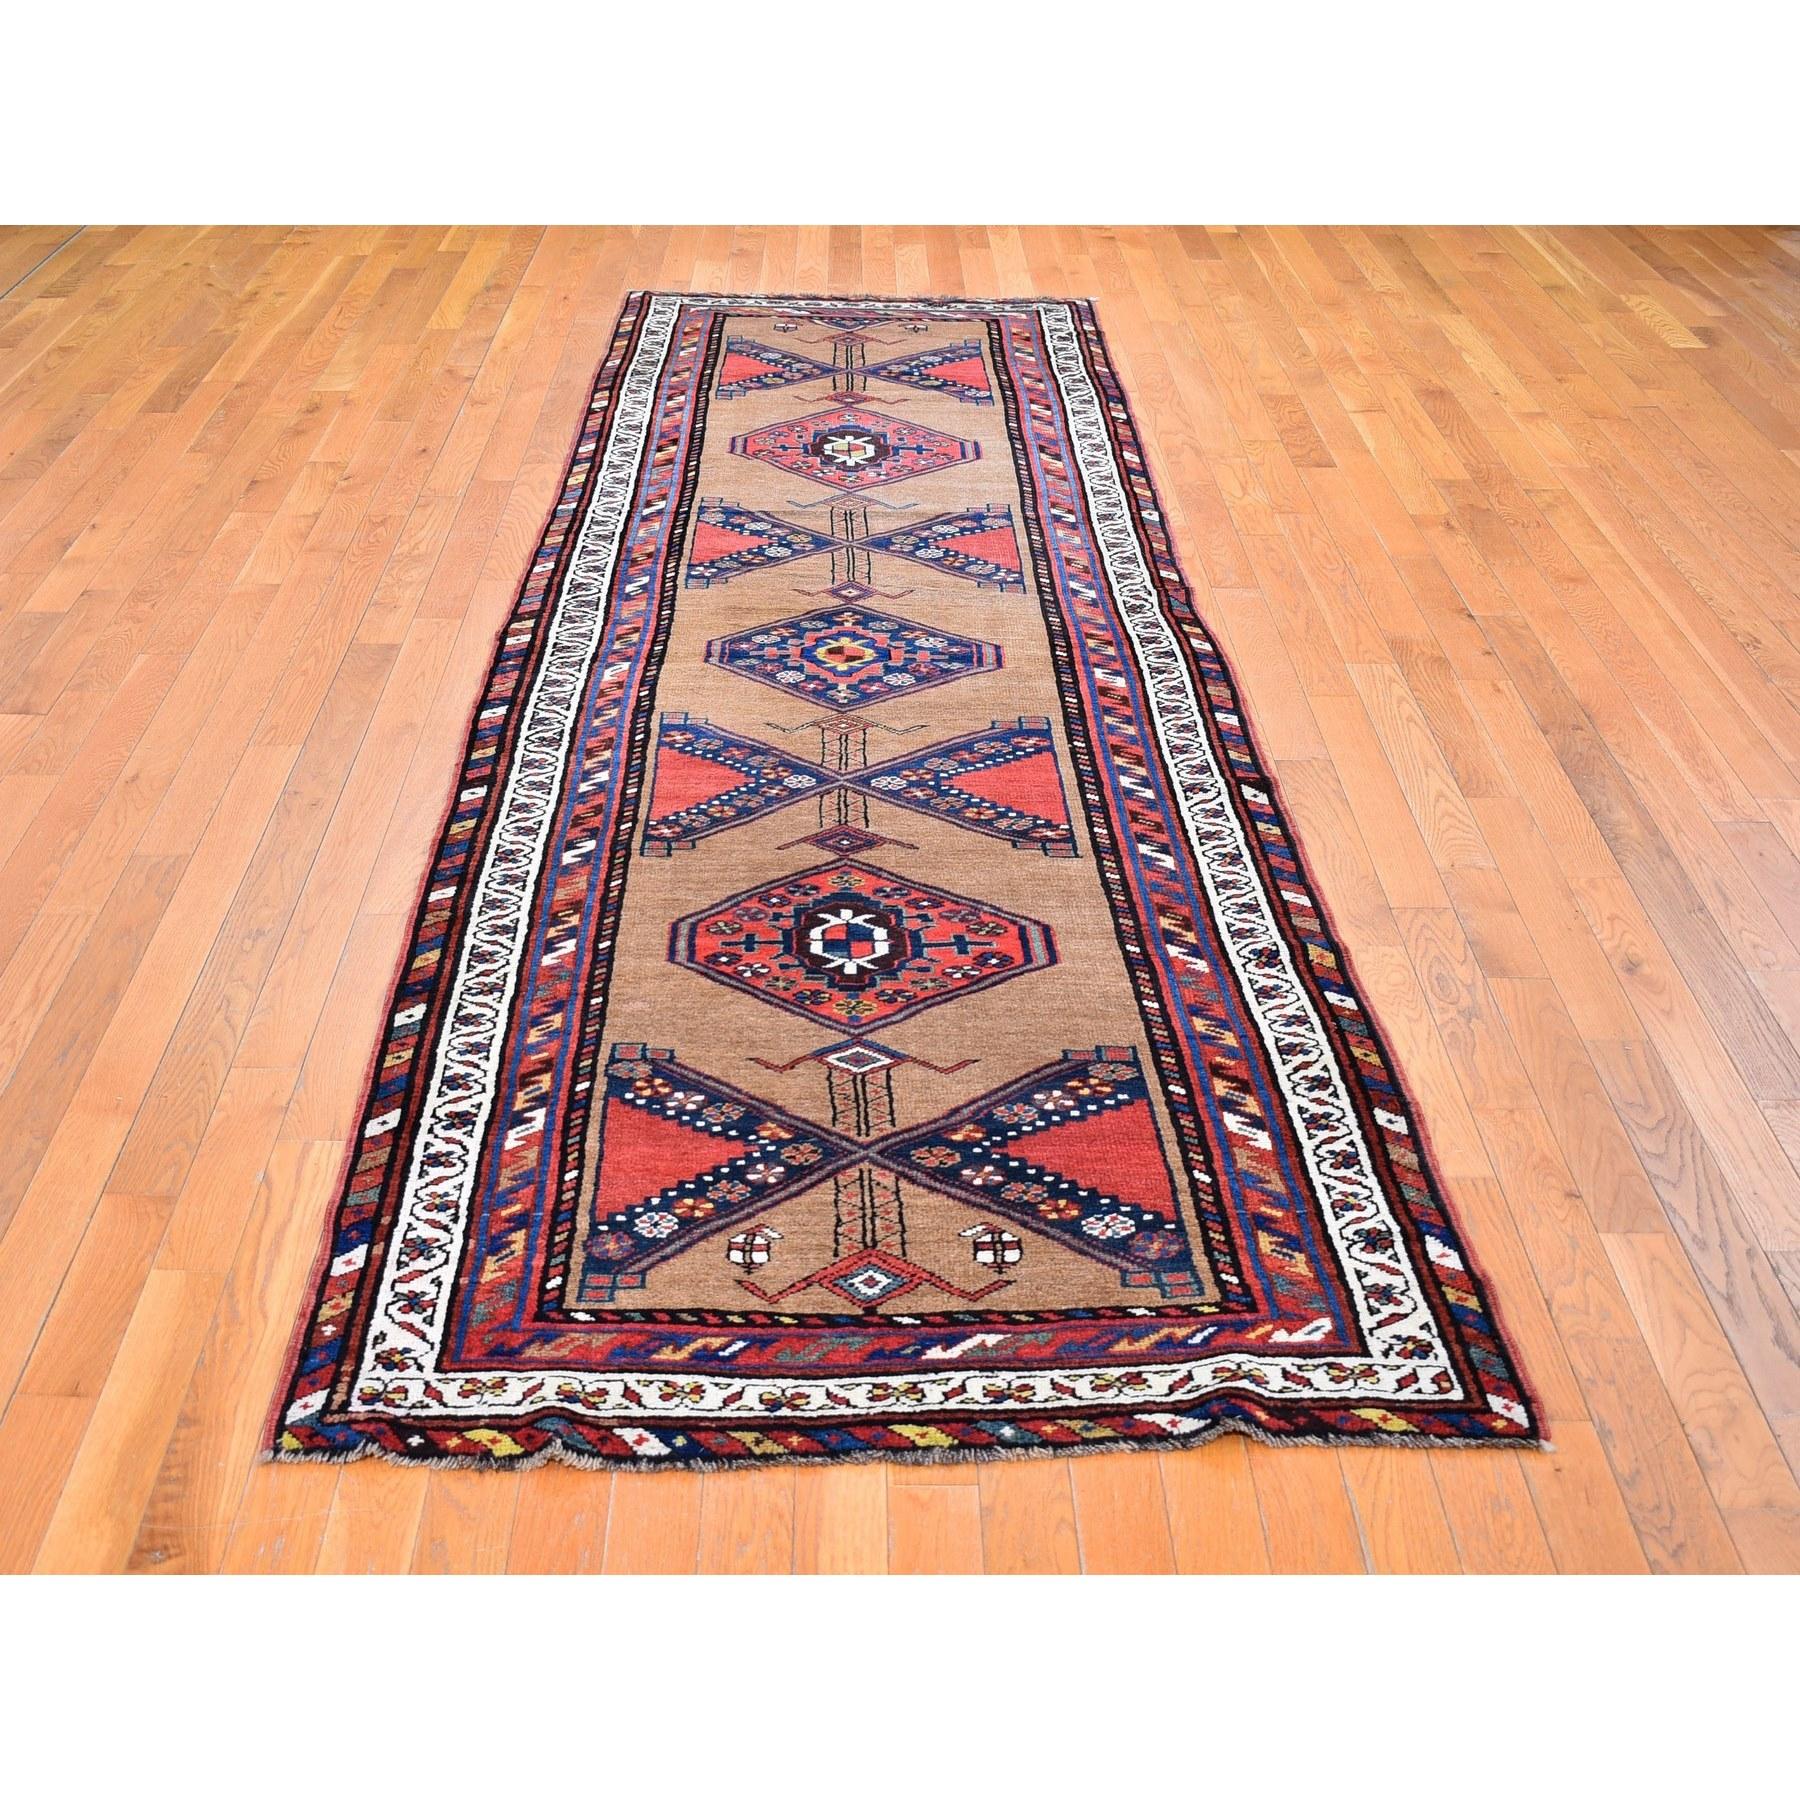 This fabulous hand-knotted carpet has been created and designed for extra strength and durability. This rug has been handcrafted for weeks in the traditional method that is used to make
Exact Rug Size in Feet and Inches : 3'9